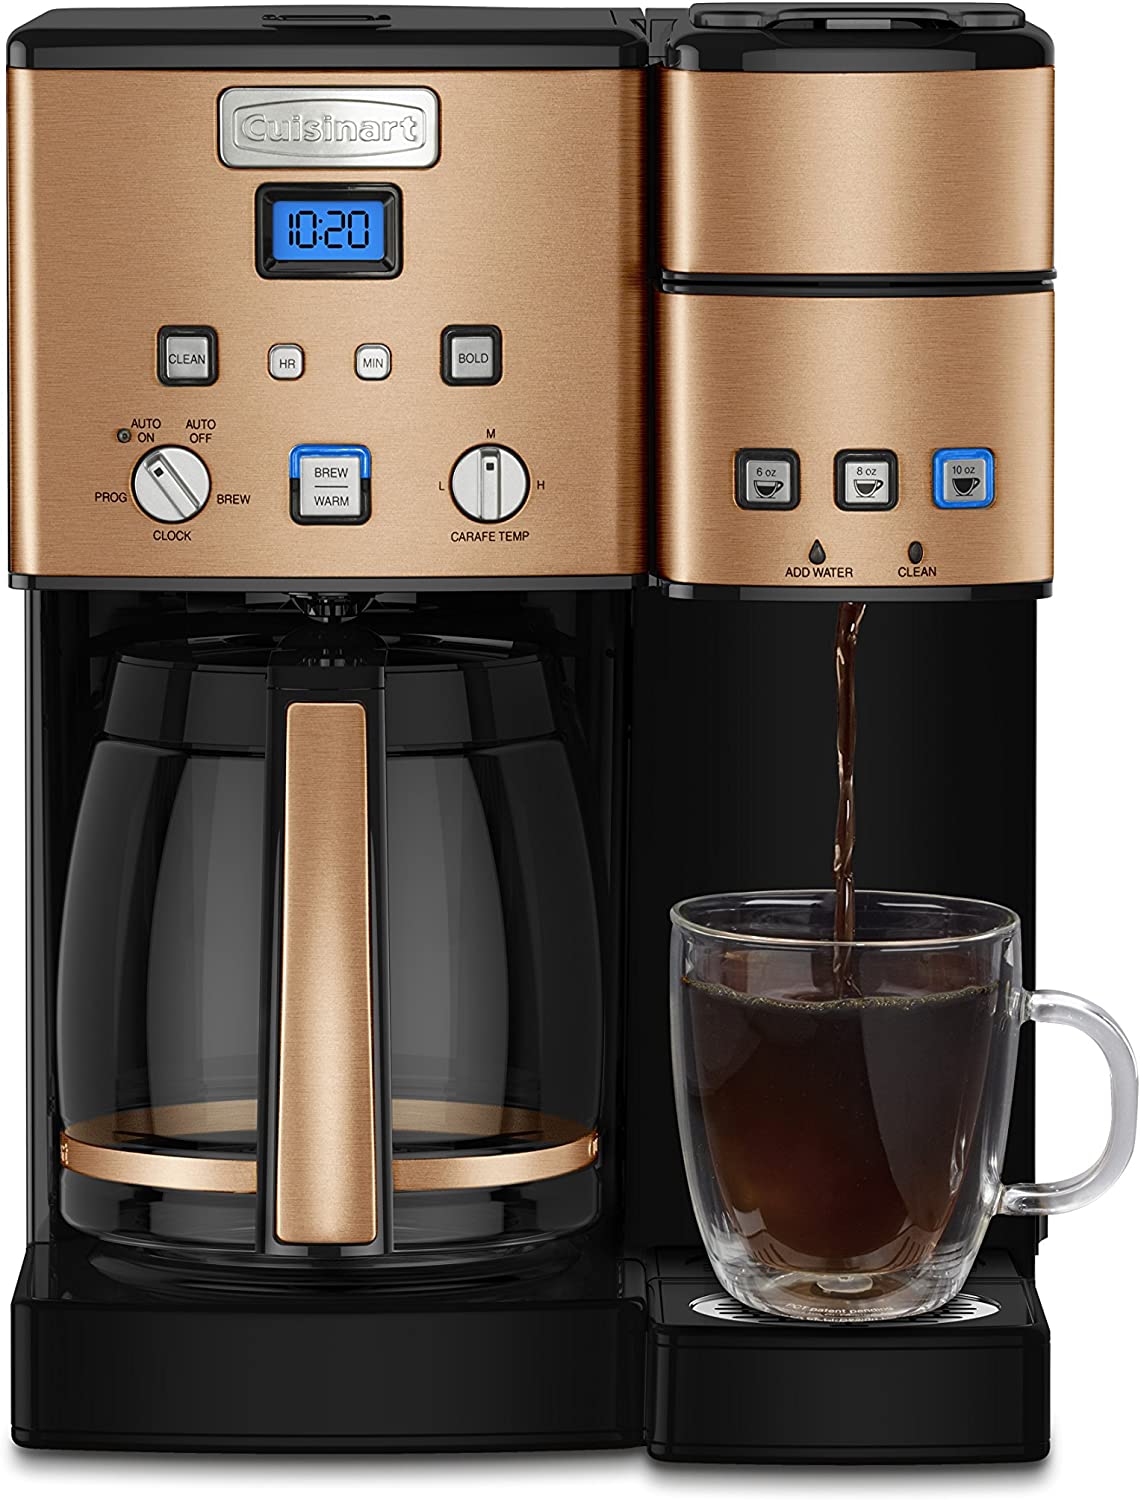 Cuisinart SS-15CPFR 12 Cup Single Serve Brewer and Coffeemaker, Copper  Certified Refurbished